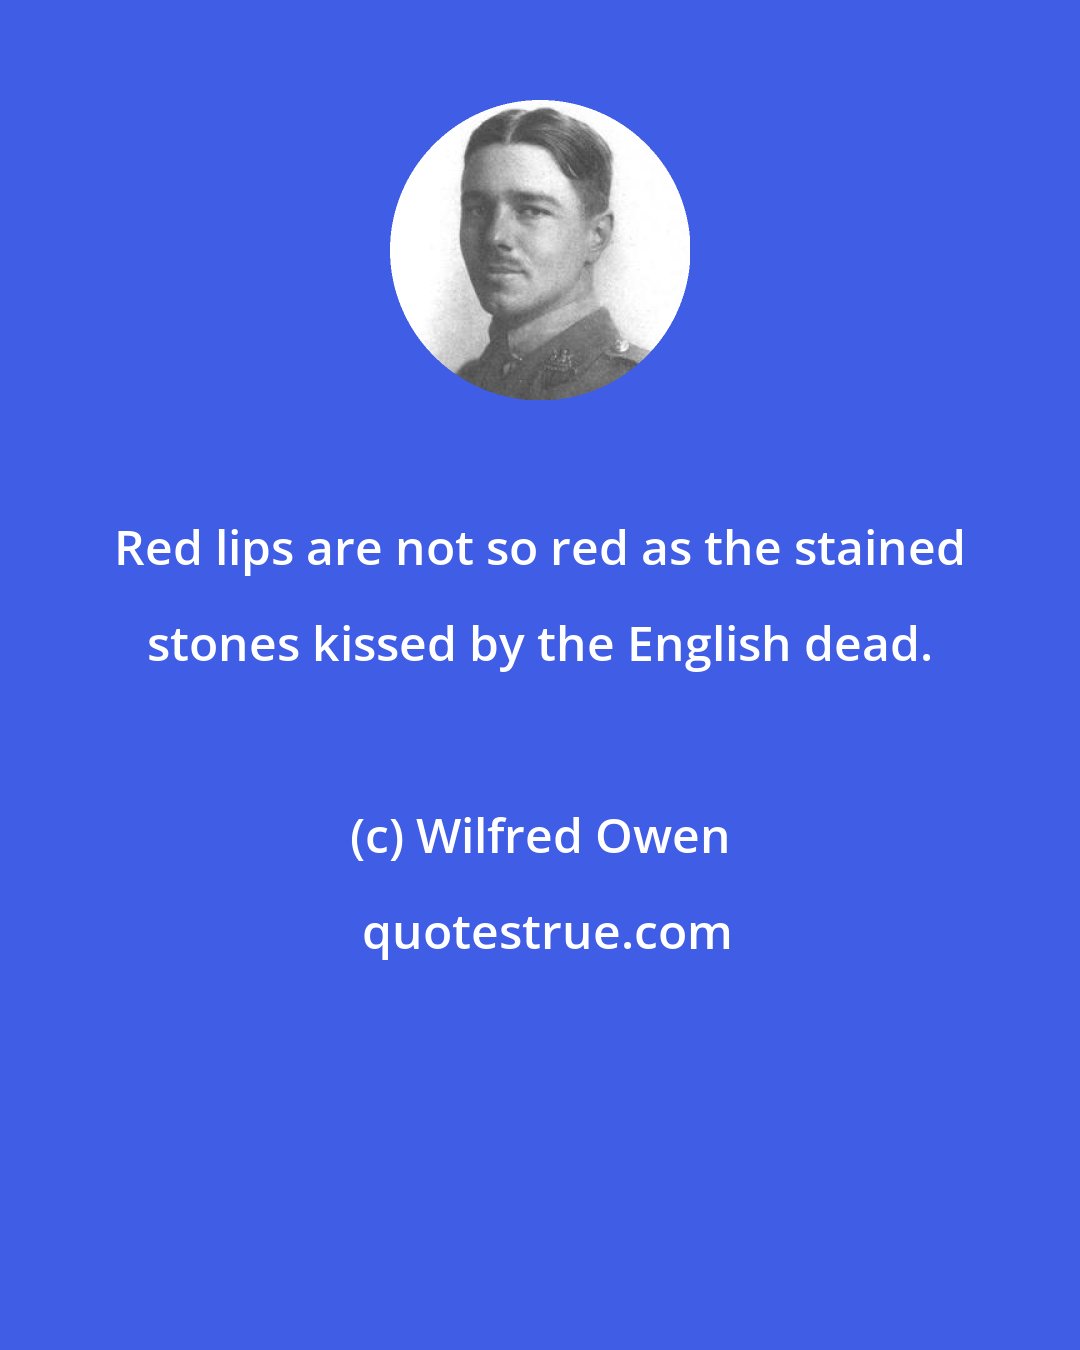 Wilfred Owen: Red lips are not so red as the stained stones kissed by the English dead.